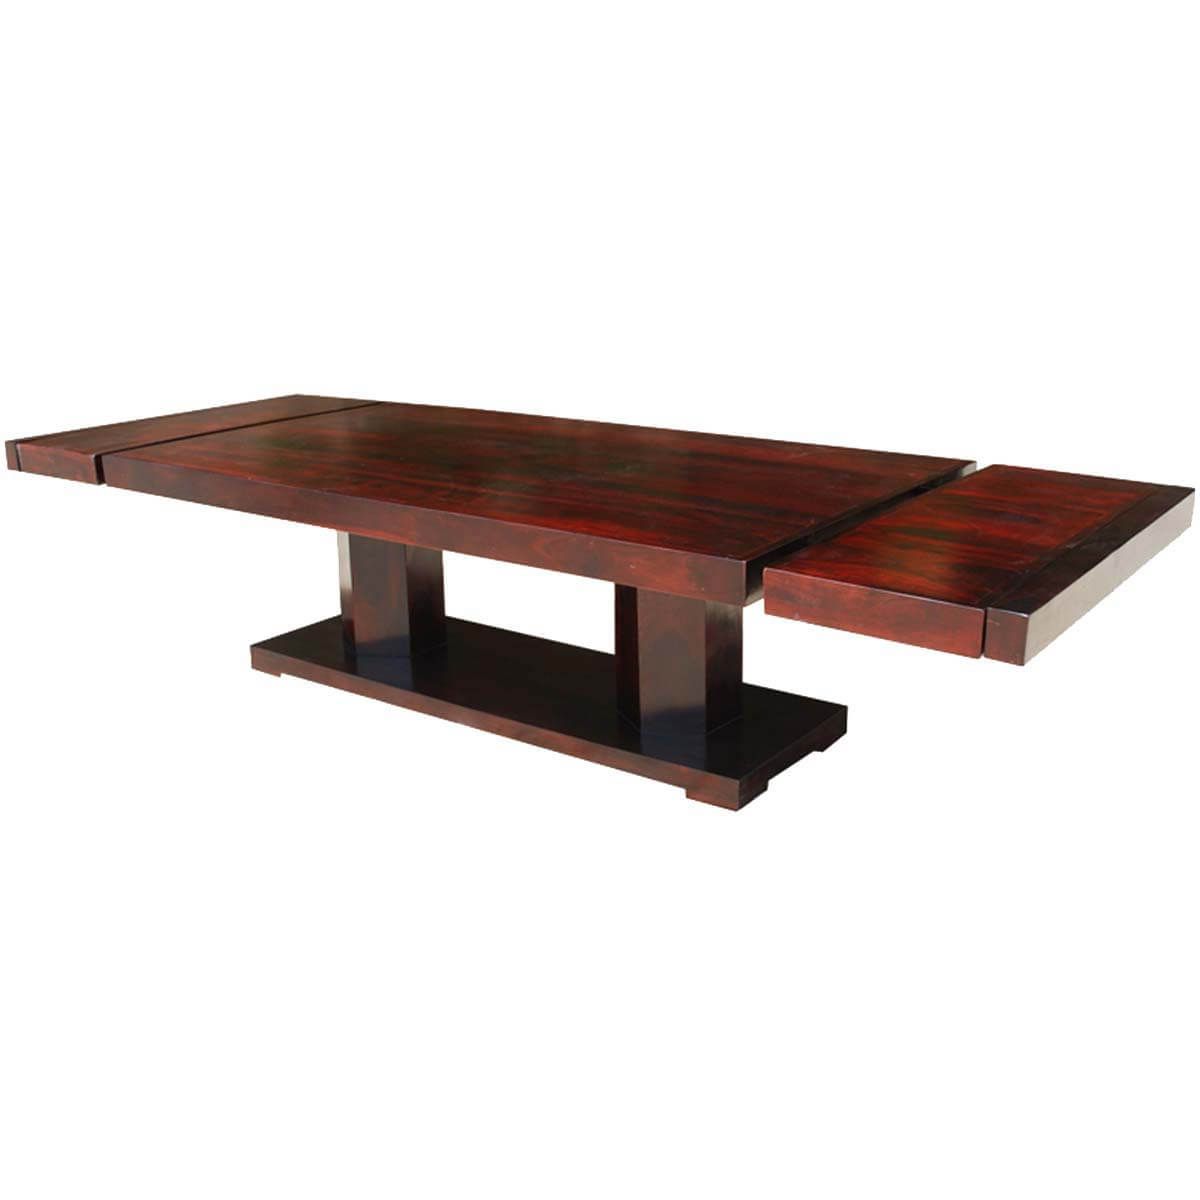 Preferred Rustic Mahogany Extending Dining Tables For Large Rustic Solid Wood Double Pedestal Extendable Dining Table (View 11 of 25)